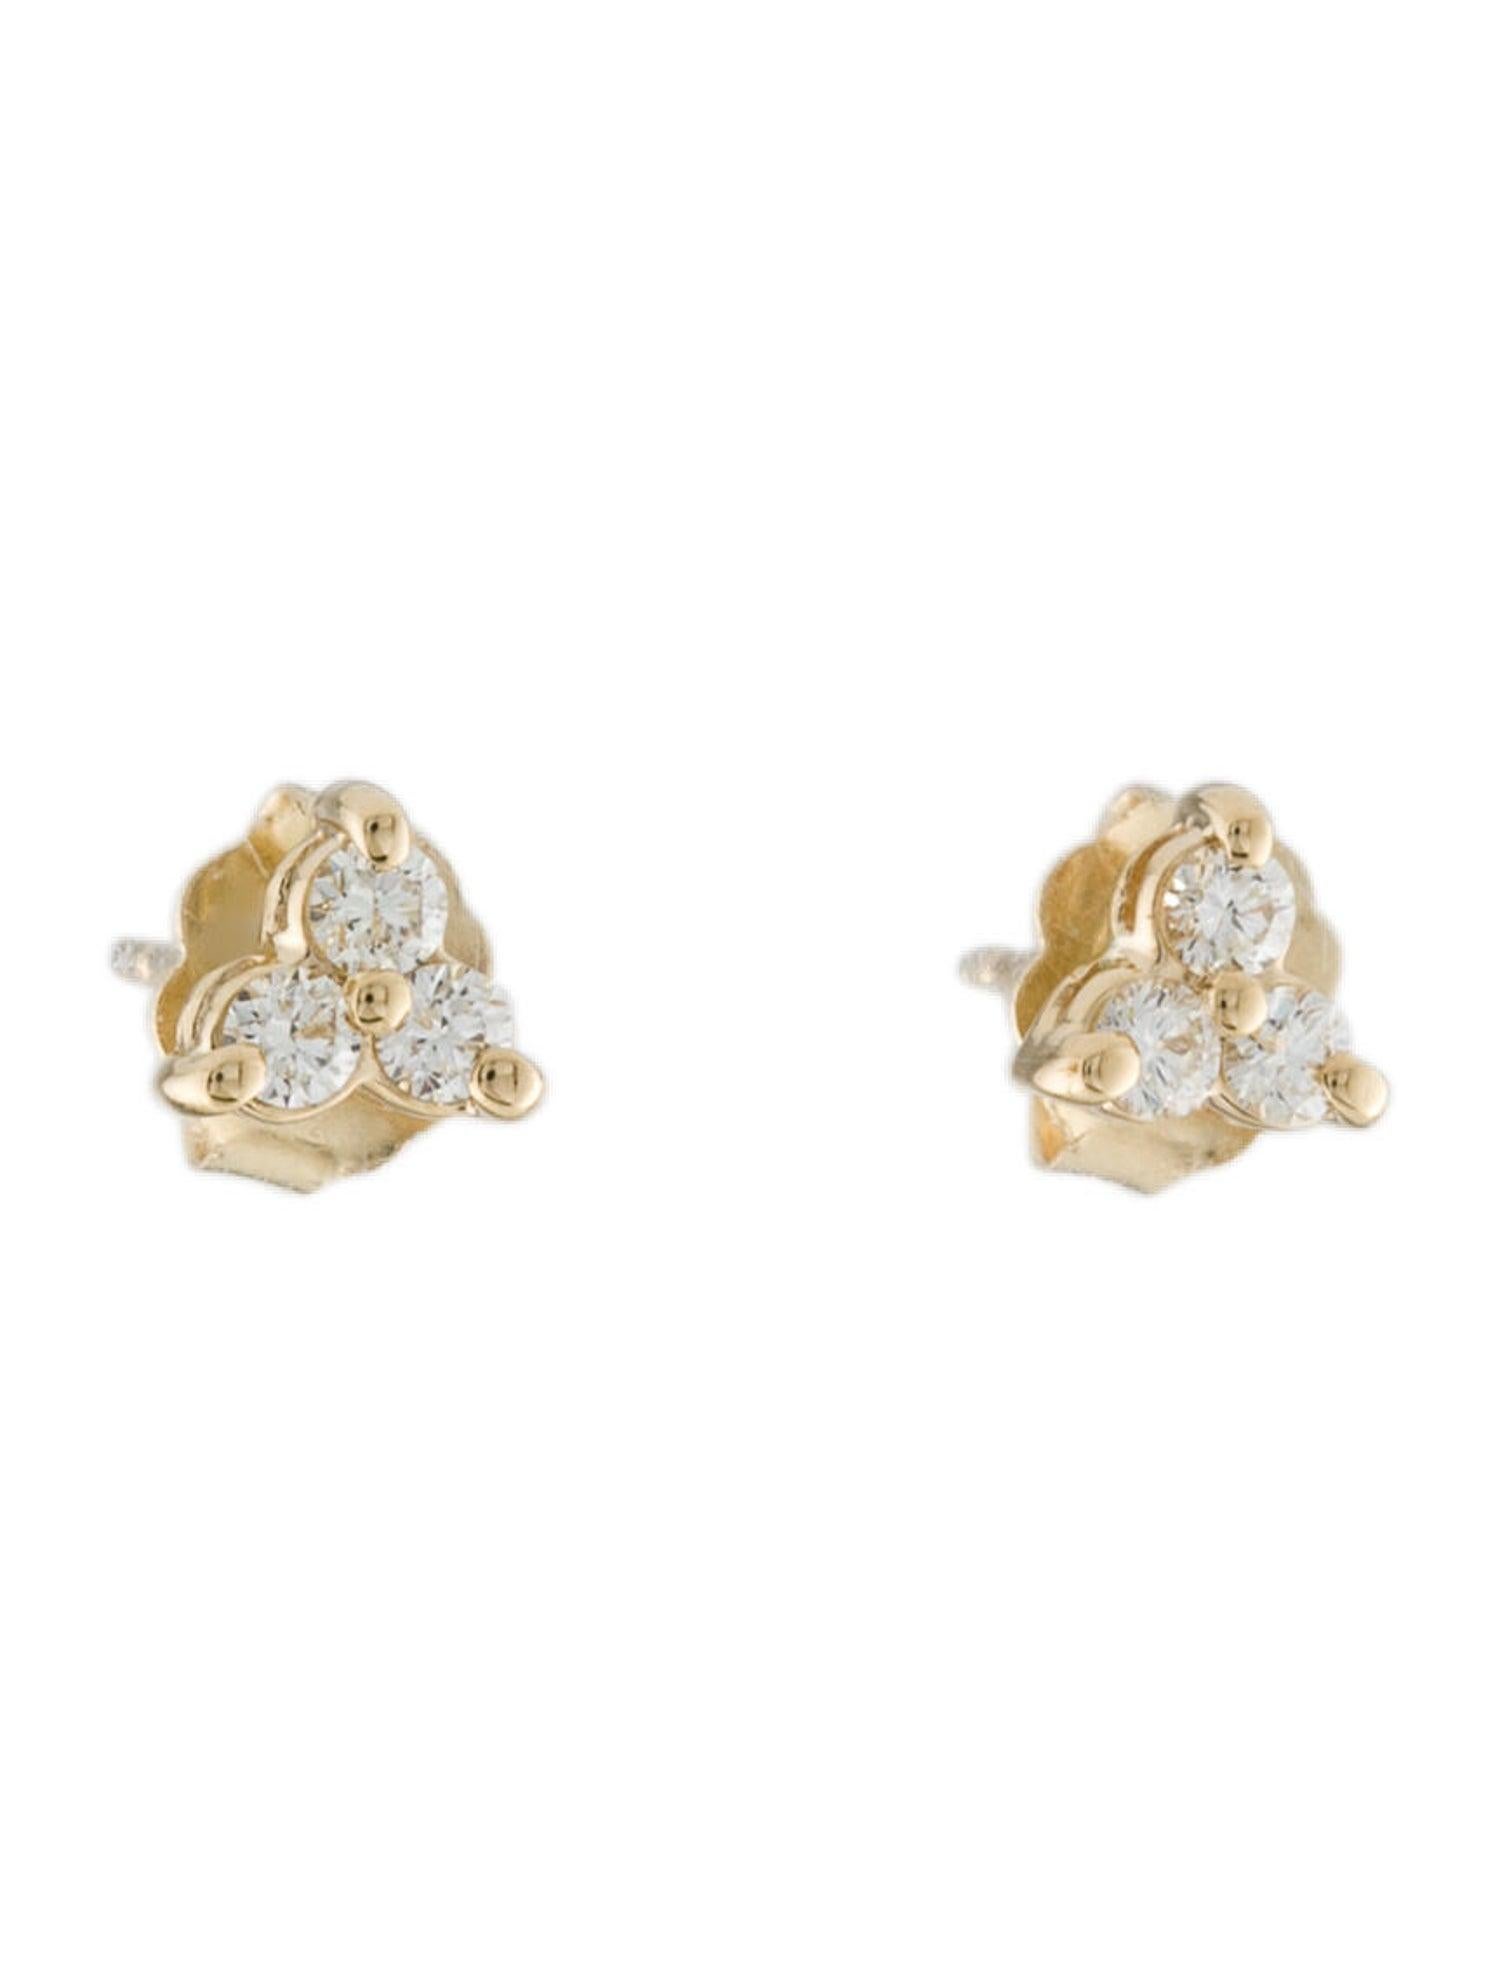 14K Yellow Gold 0.24 Carat Diamond 3 Stone Earrings In New Condition For Sale In Great neck, NY